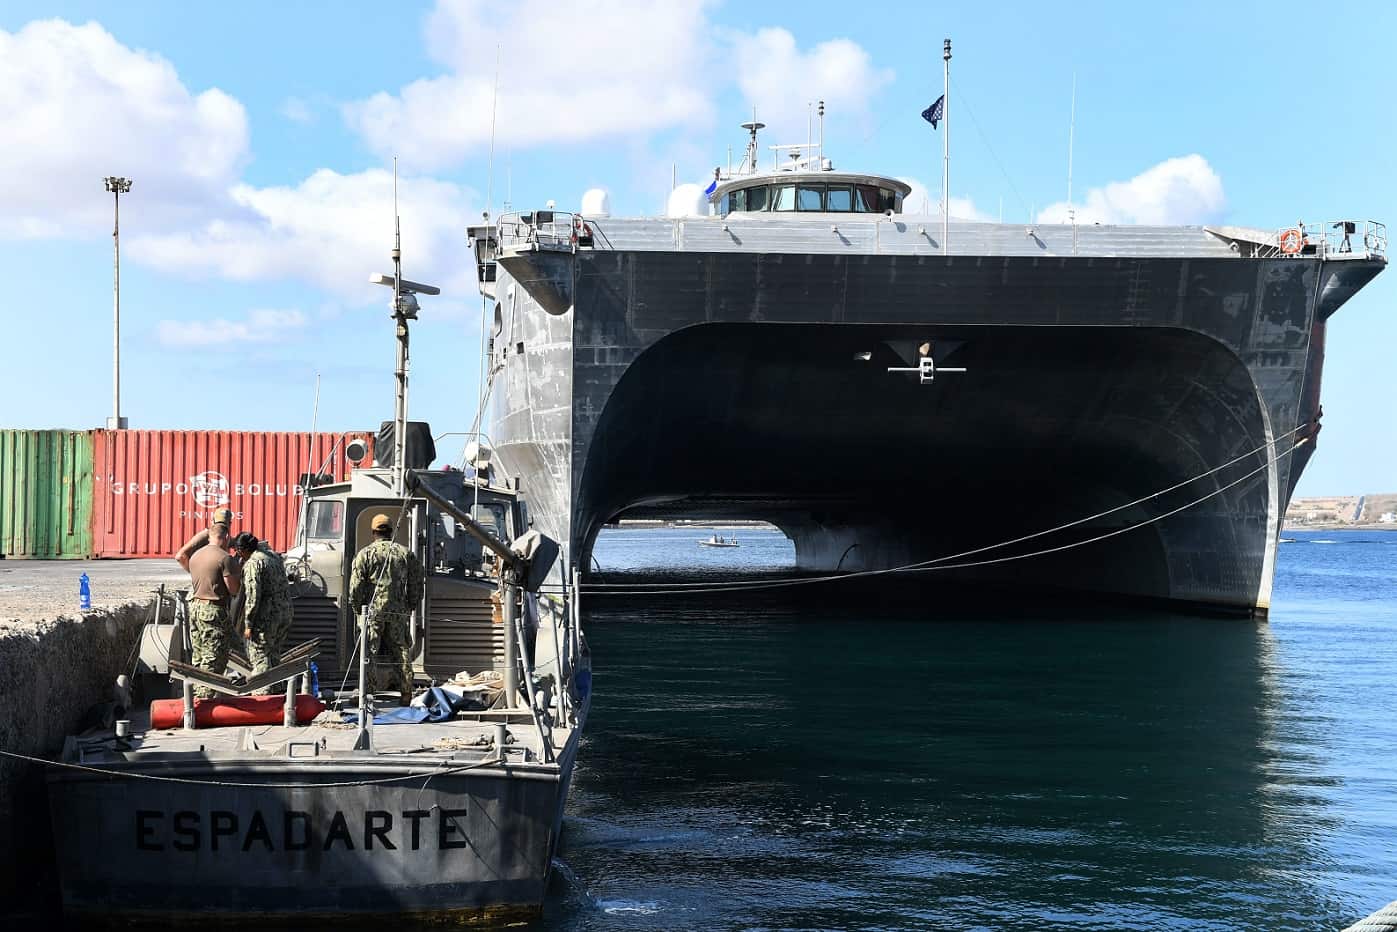 U.S. Navy newest expeditionary fast transport ship completed acceptance trials